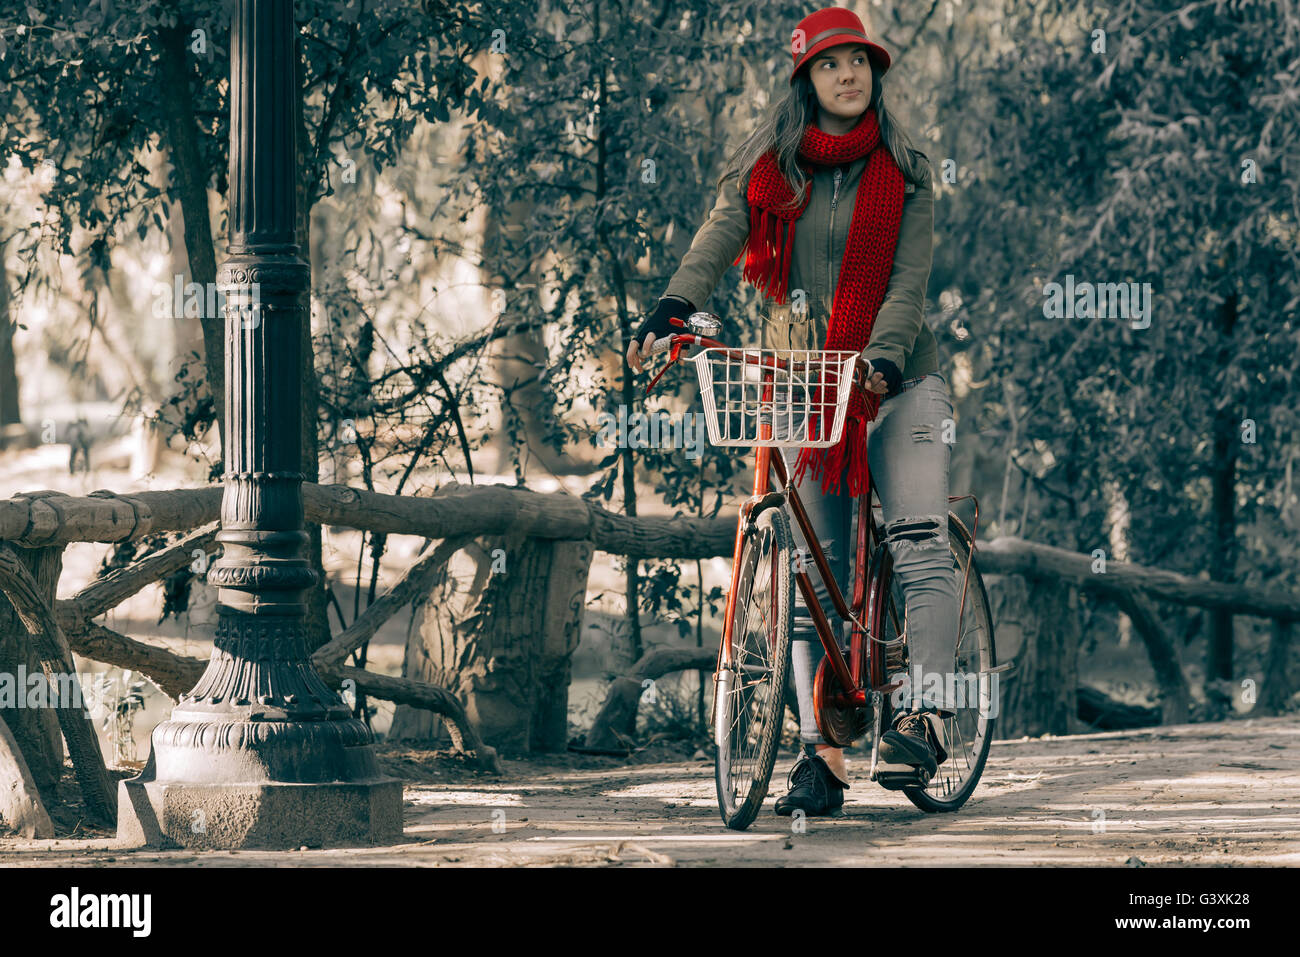 Girl riding bike at park wearing red urban fashion on beautiful autumn day, vintage contrast effect. Stock Photo